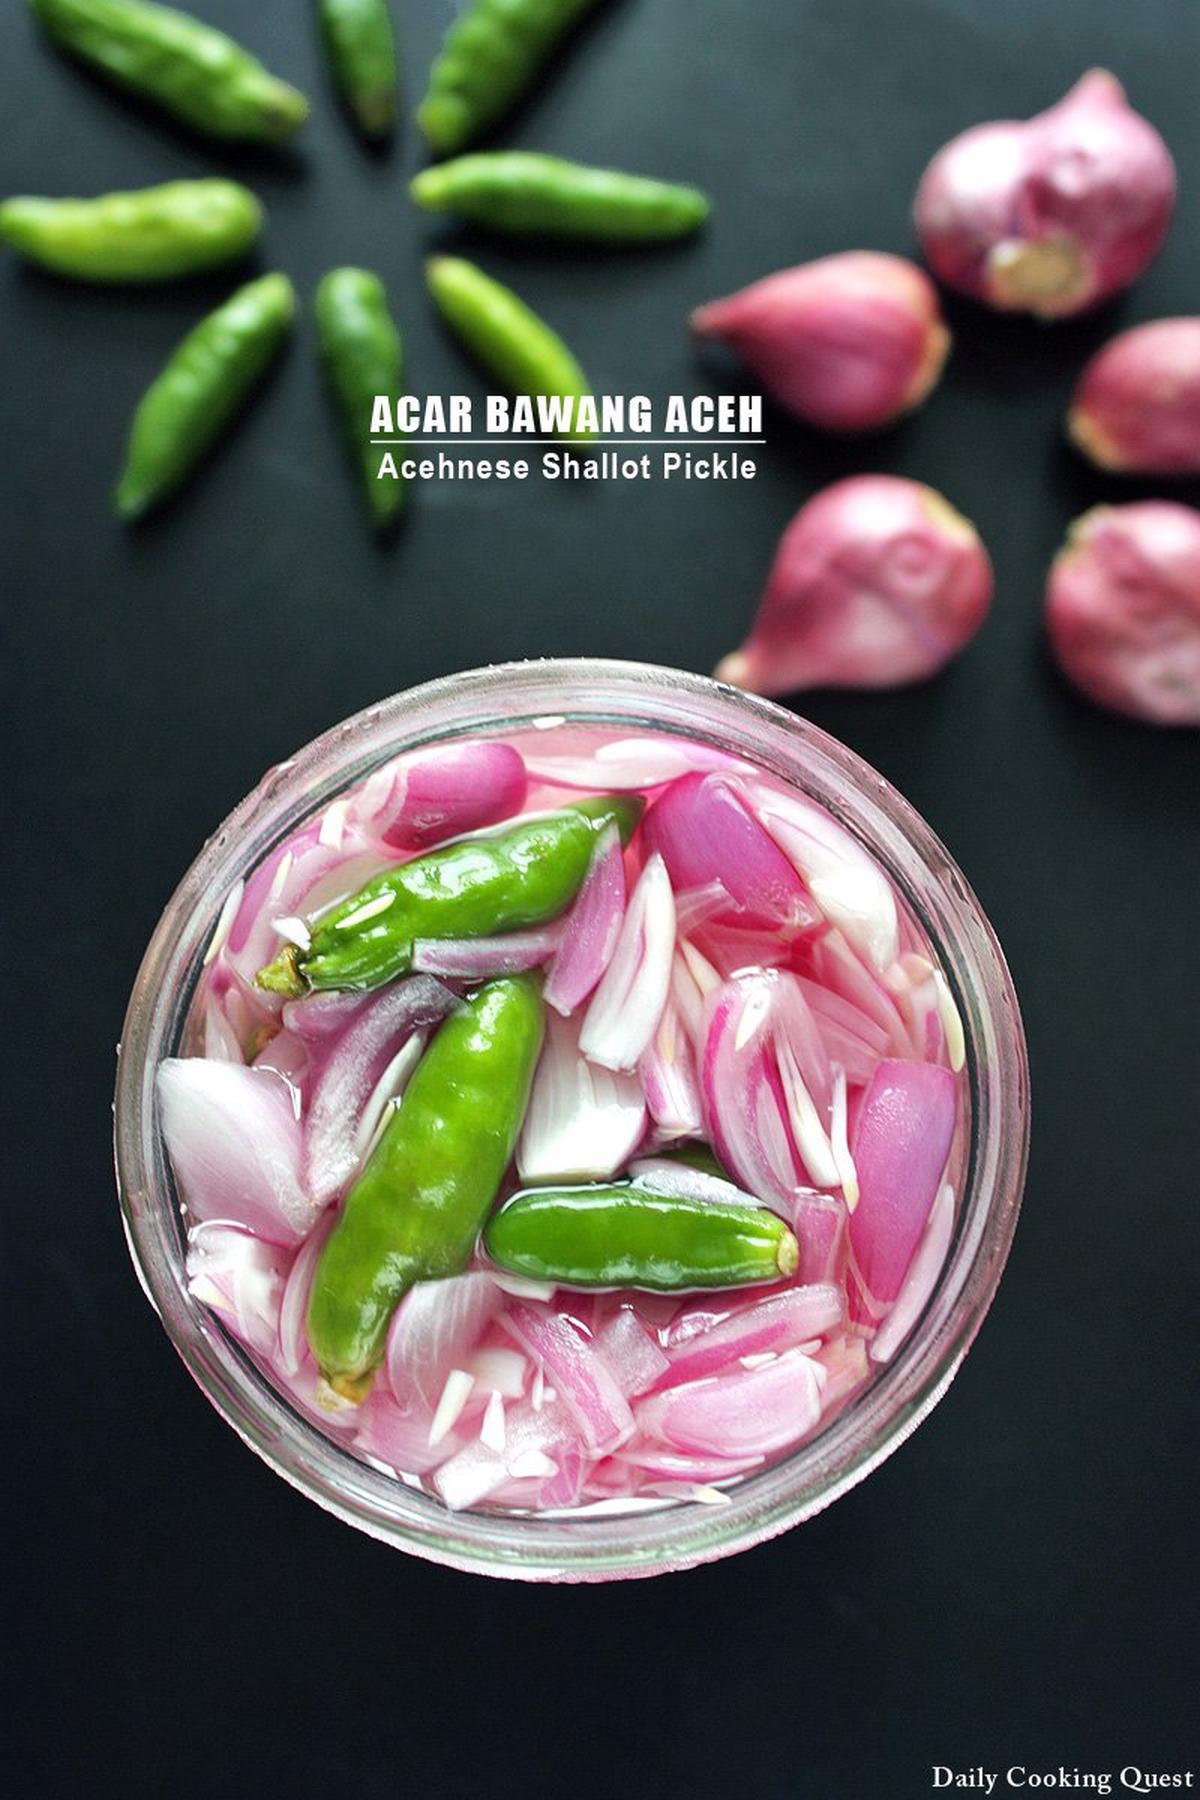 Acar Bawang Aceh - Acehnese Shallot Pickle